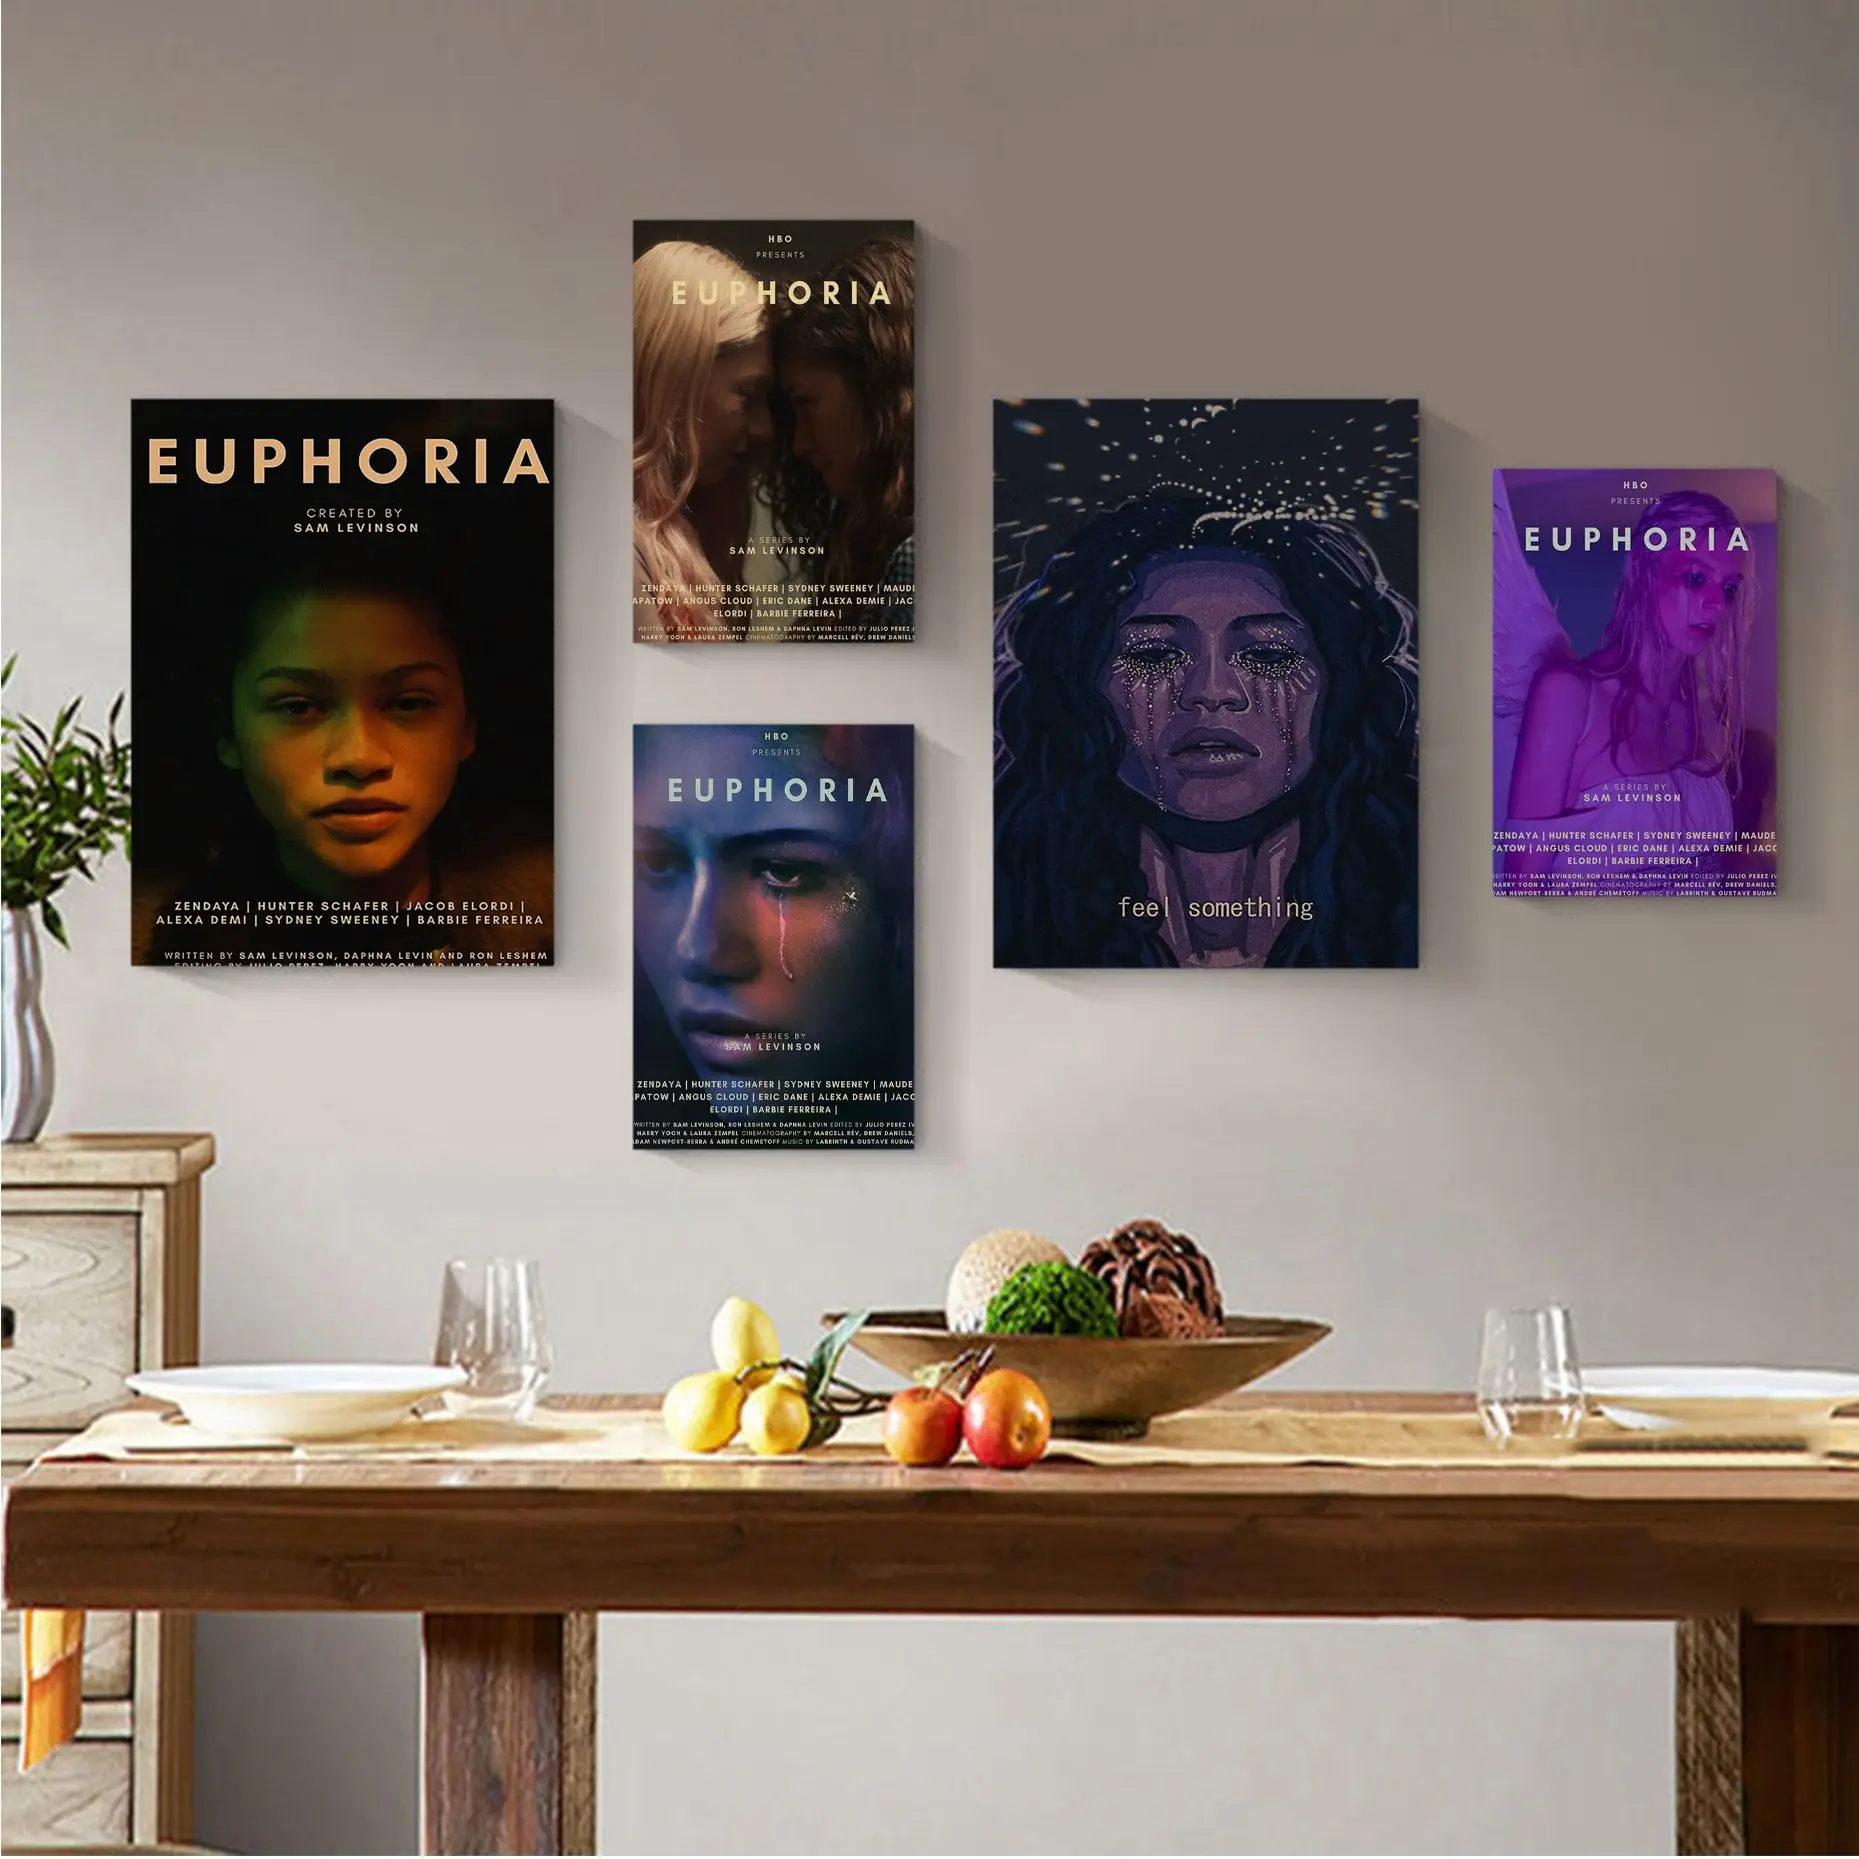 Trendy TV Euphoria Anime Posters For Living Room Bar Decoration Decor Art Wall Stickers